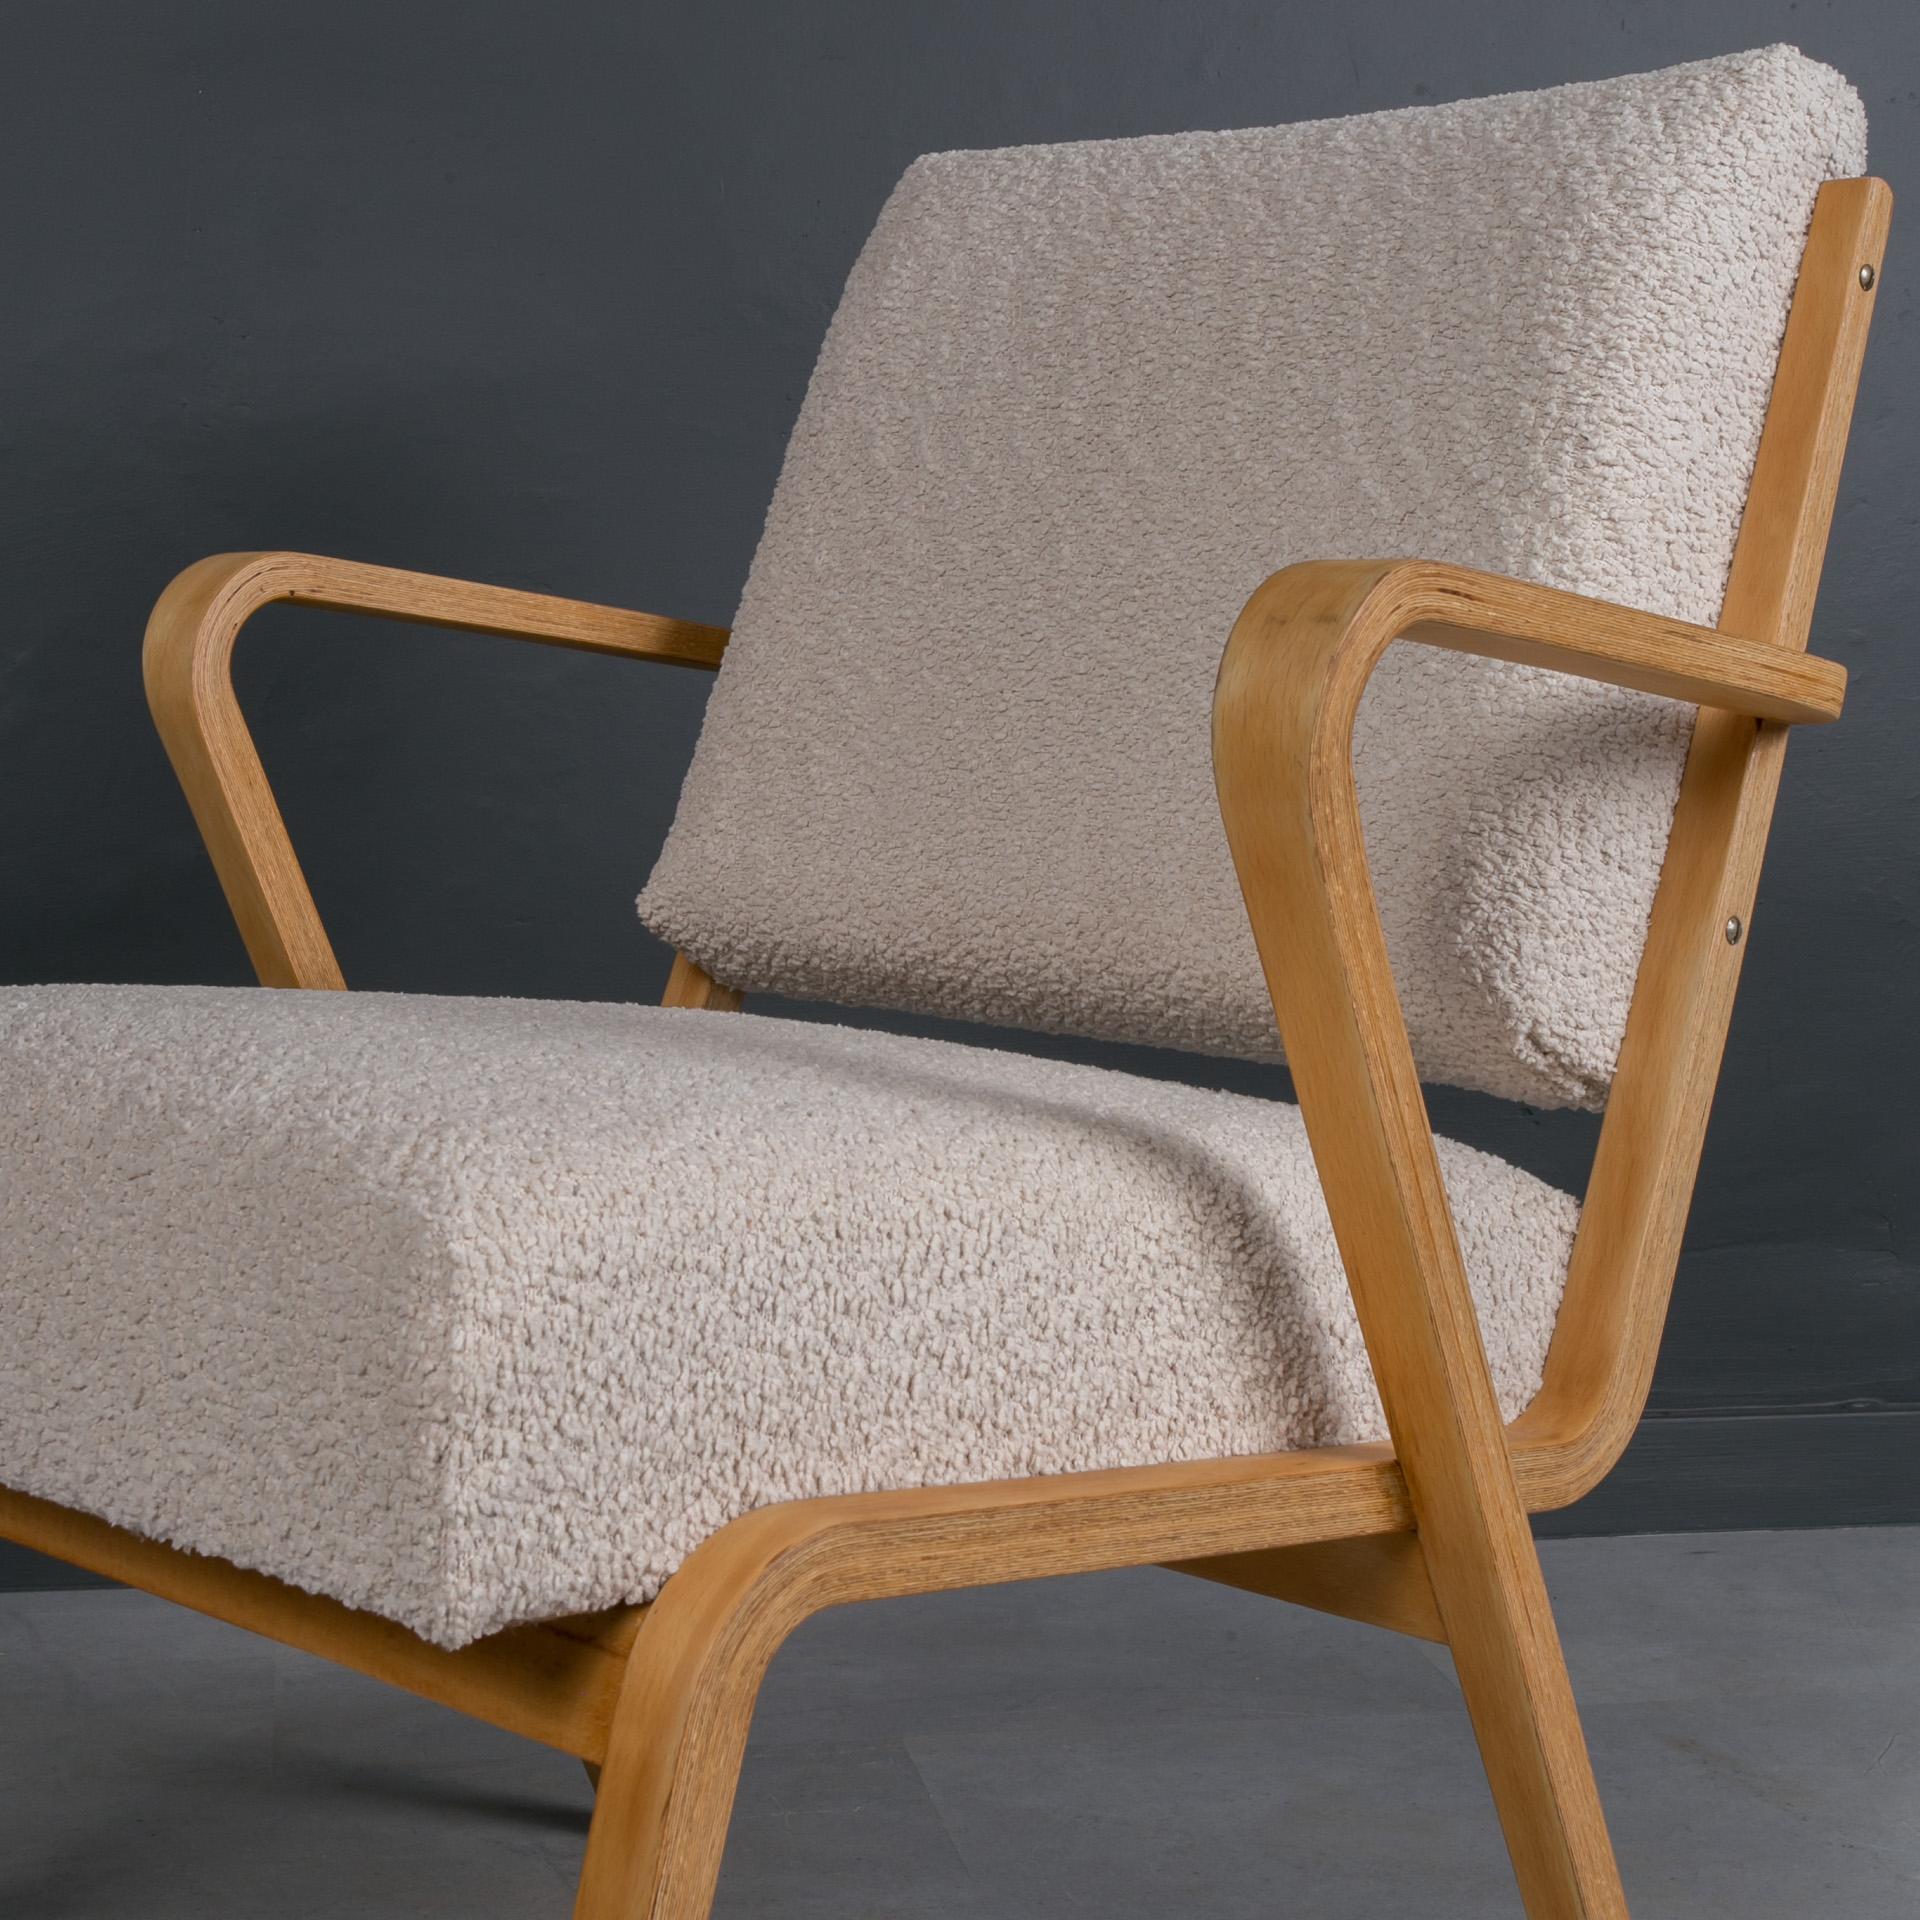 Set of Two Lounge Chairs by S. Selmanagić, 1960s, Reupholstered in Creamy Boucle For Sale 1